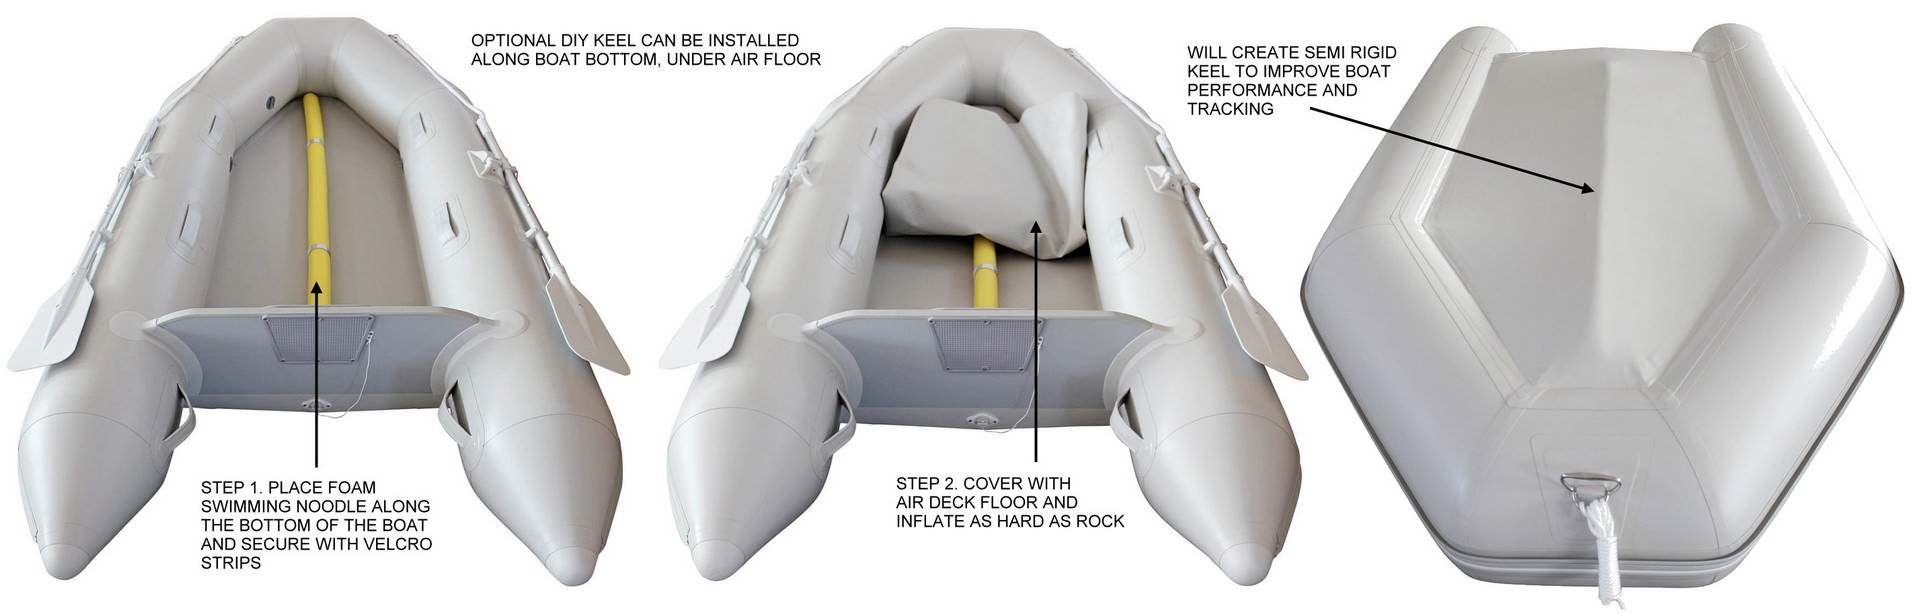 How to install keel on CB290 inflatable boats